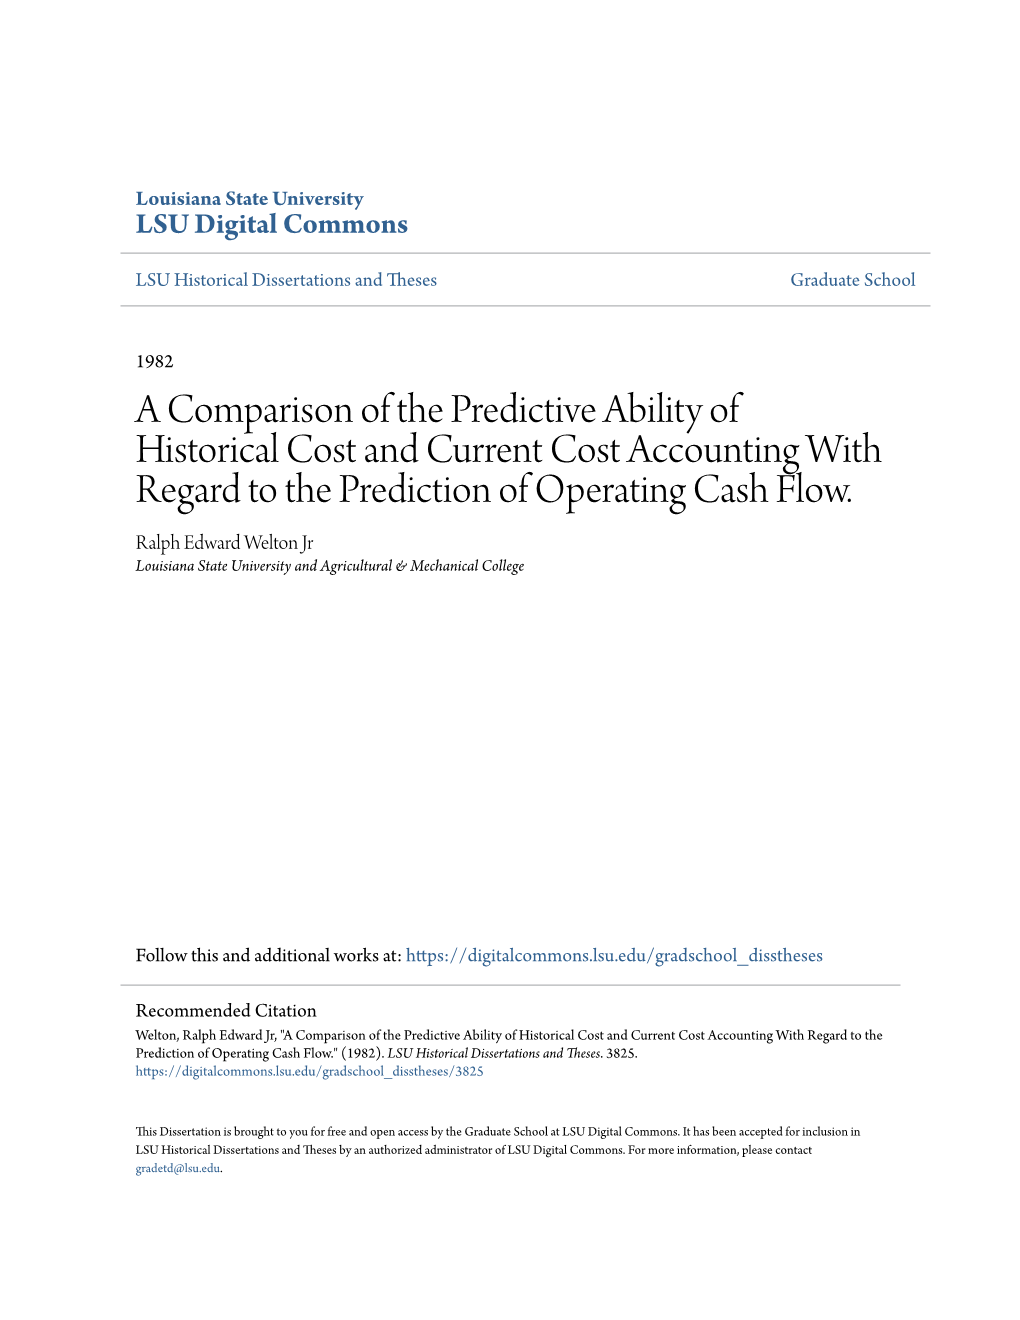 A Comparison of the Predictive Ability of Historical Cost and Current Cost Accounting with Regard to the Prediction of Operating Cash Flow